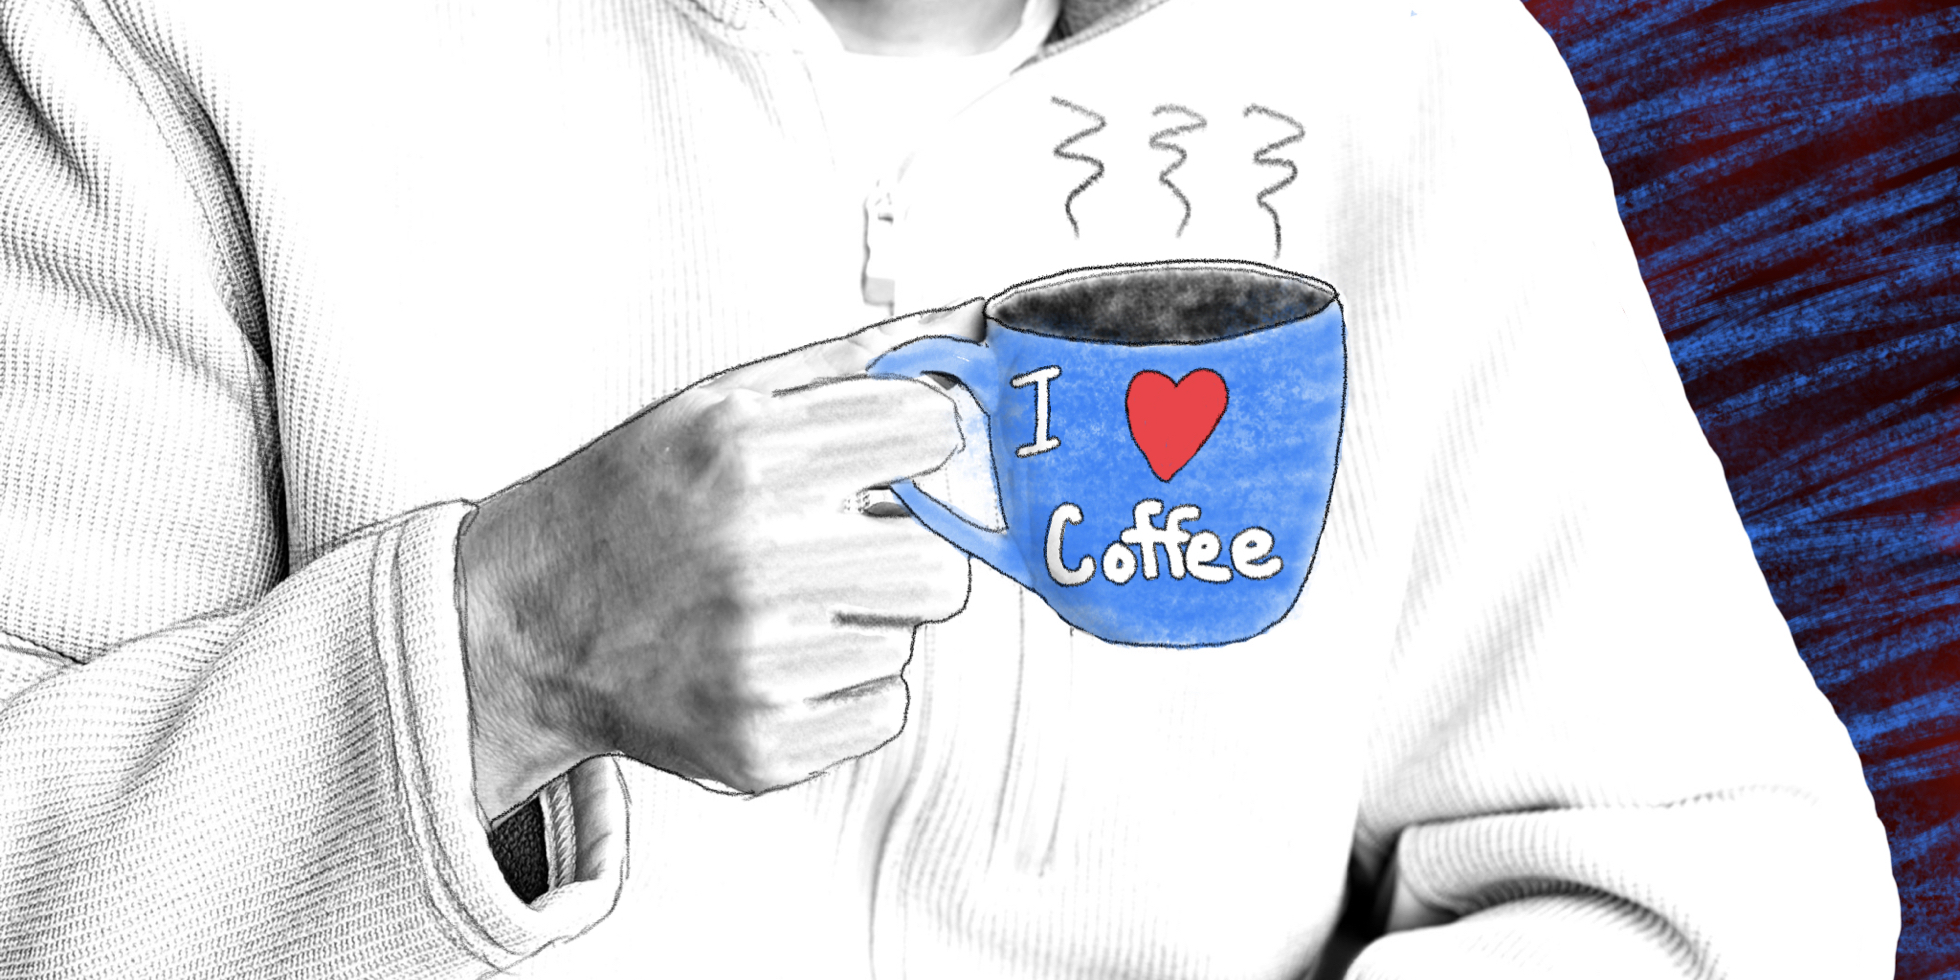 A close up image of a hand holding a coffee mug with I love/heart coffee drawn on it.